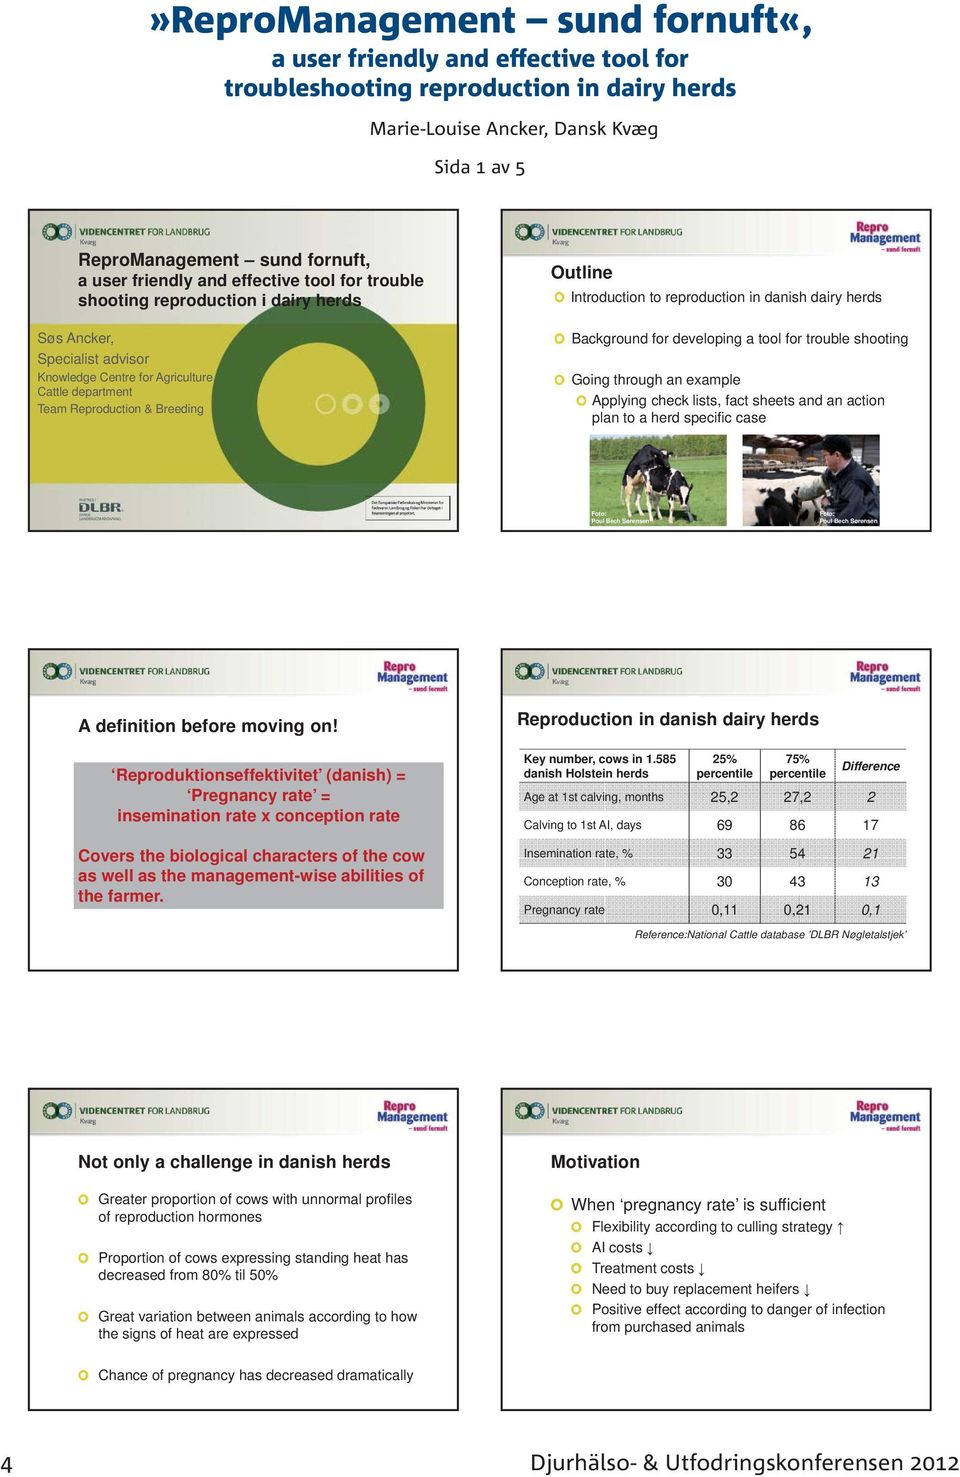 Introduction to reproduction in danish dairy herds Background for developing a tool for trouble shooting Going through an example Applying check lists, fact sheets and an action plan to a herd